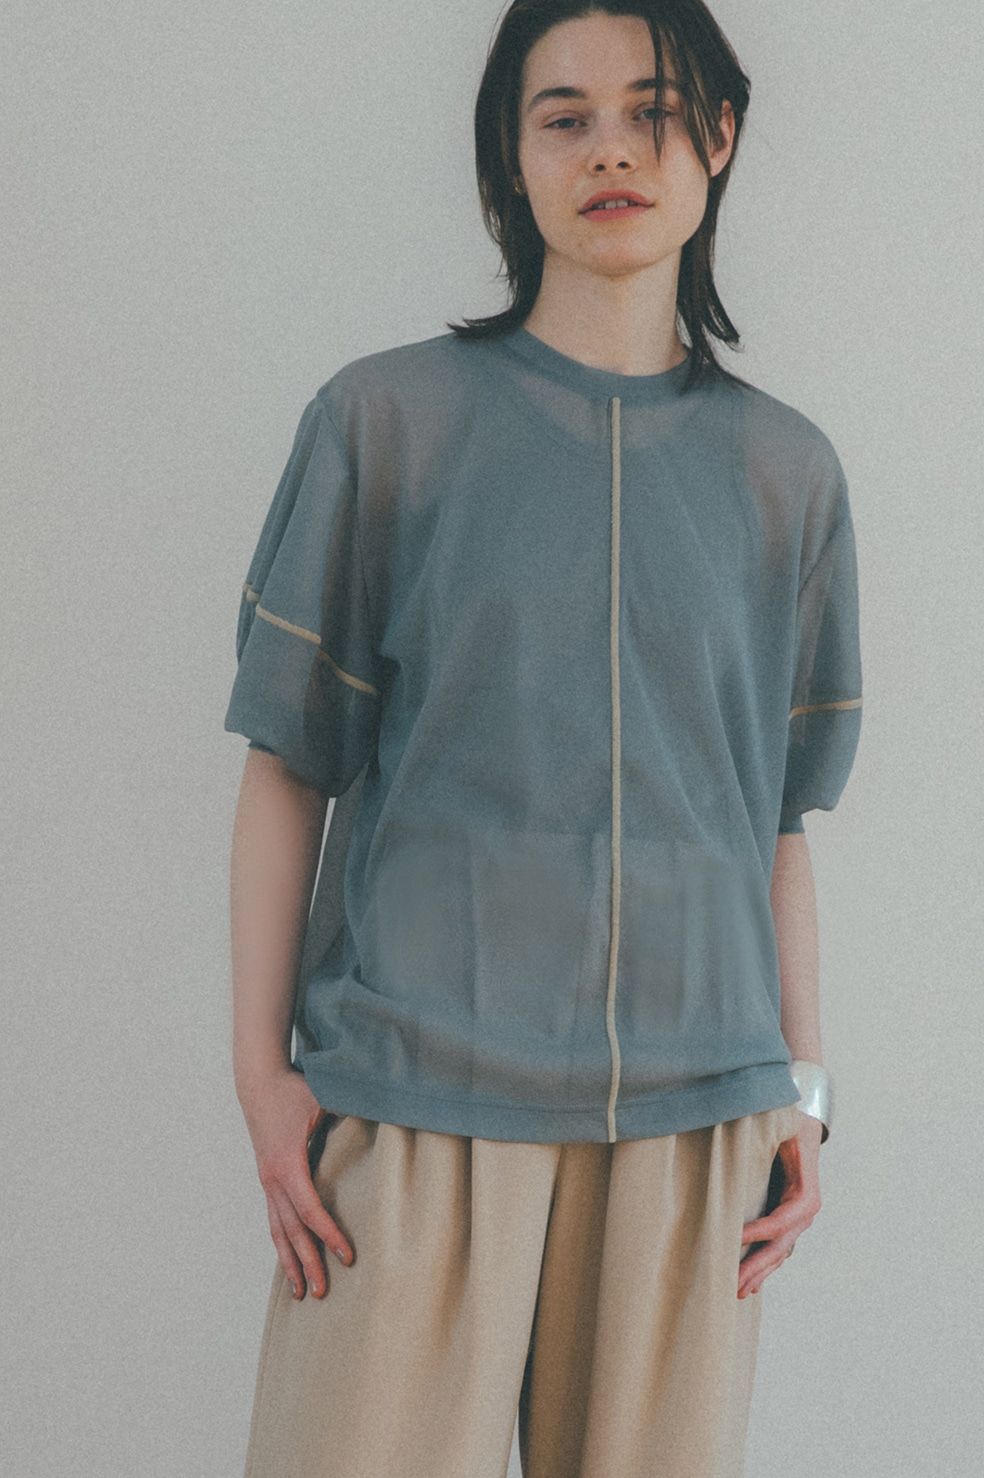 clane クラネ　SOLID SLEEVE SHEER S/S TOPS